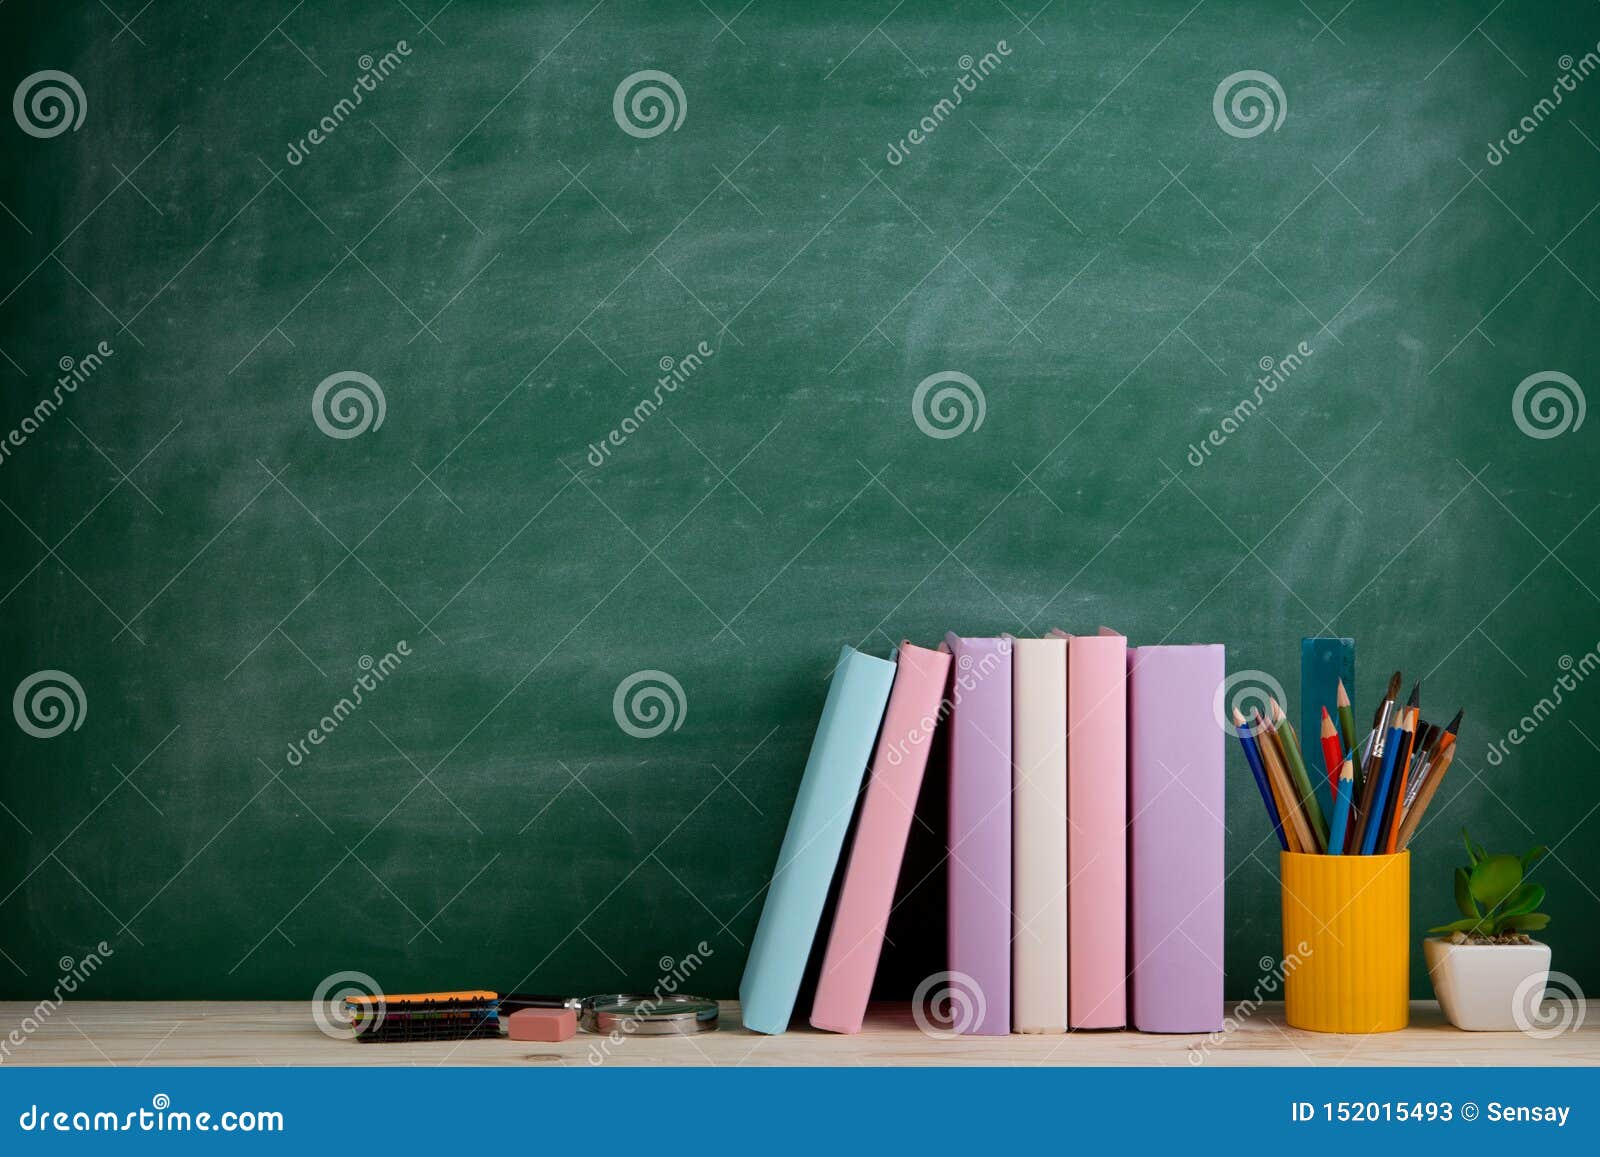 Education and Reading Concept - Group of Colorful Books on the Wooden Table  in the Classroom, Blackboard Background Stock Image - Image of bookstore,  bookshelf: 152015493